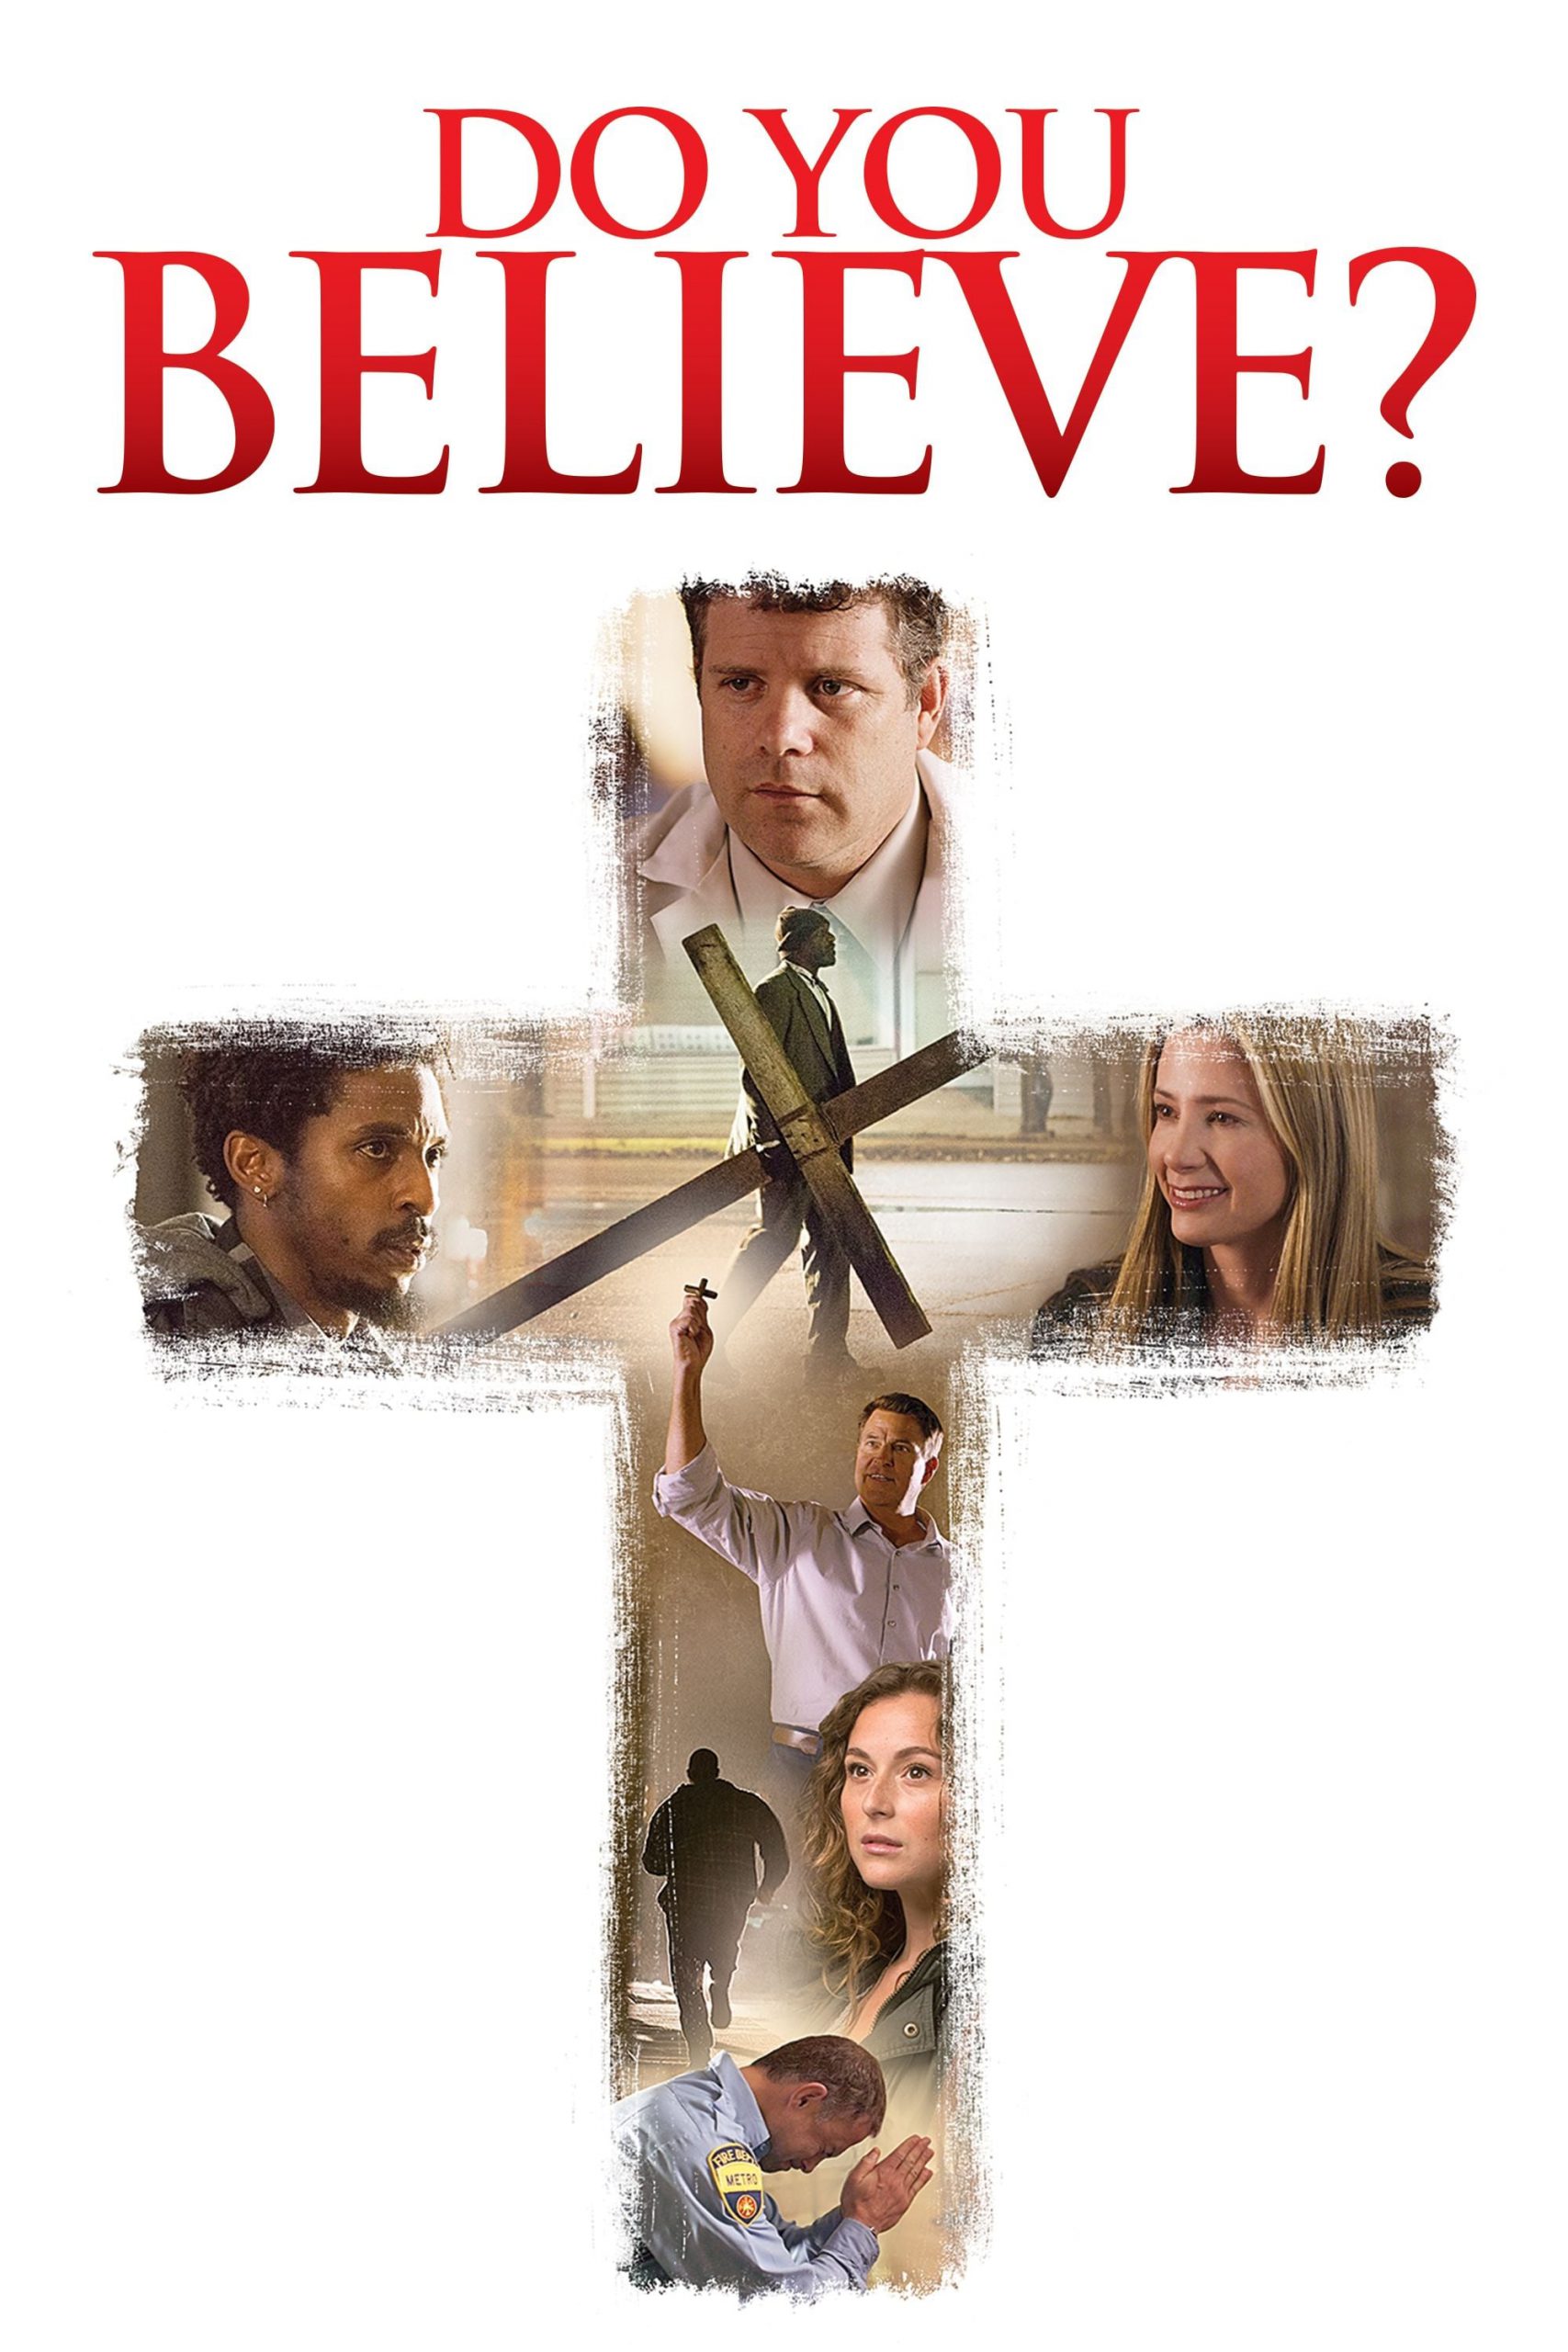 Poster for the movie "Do You Believe?"